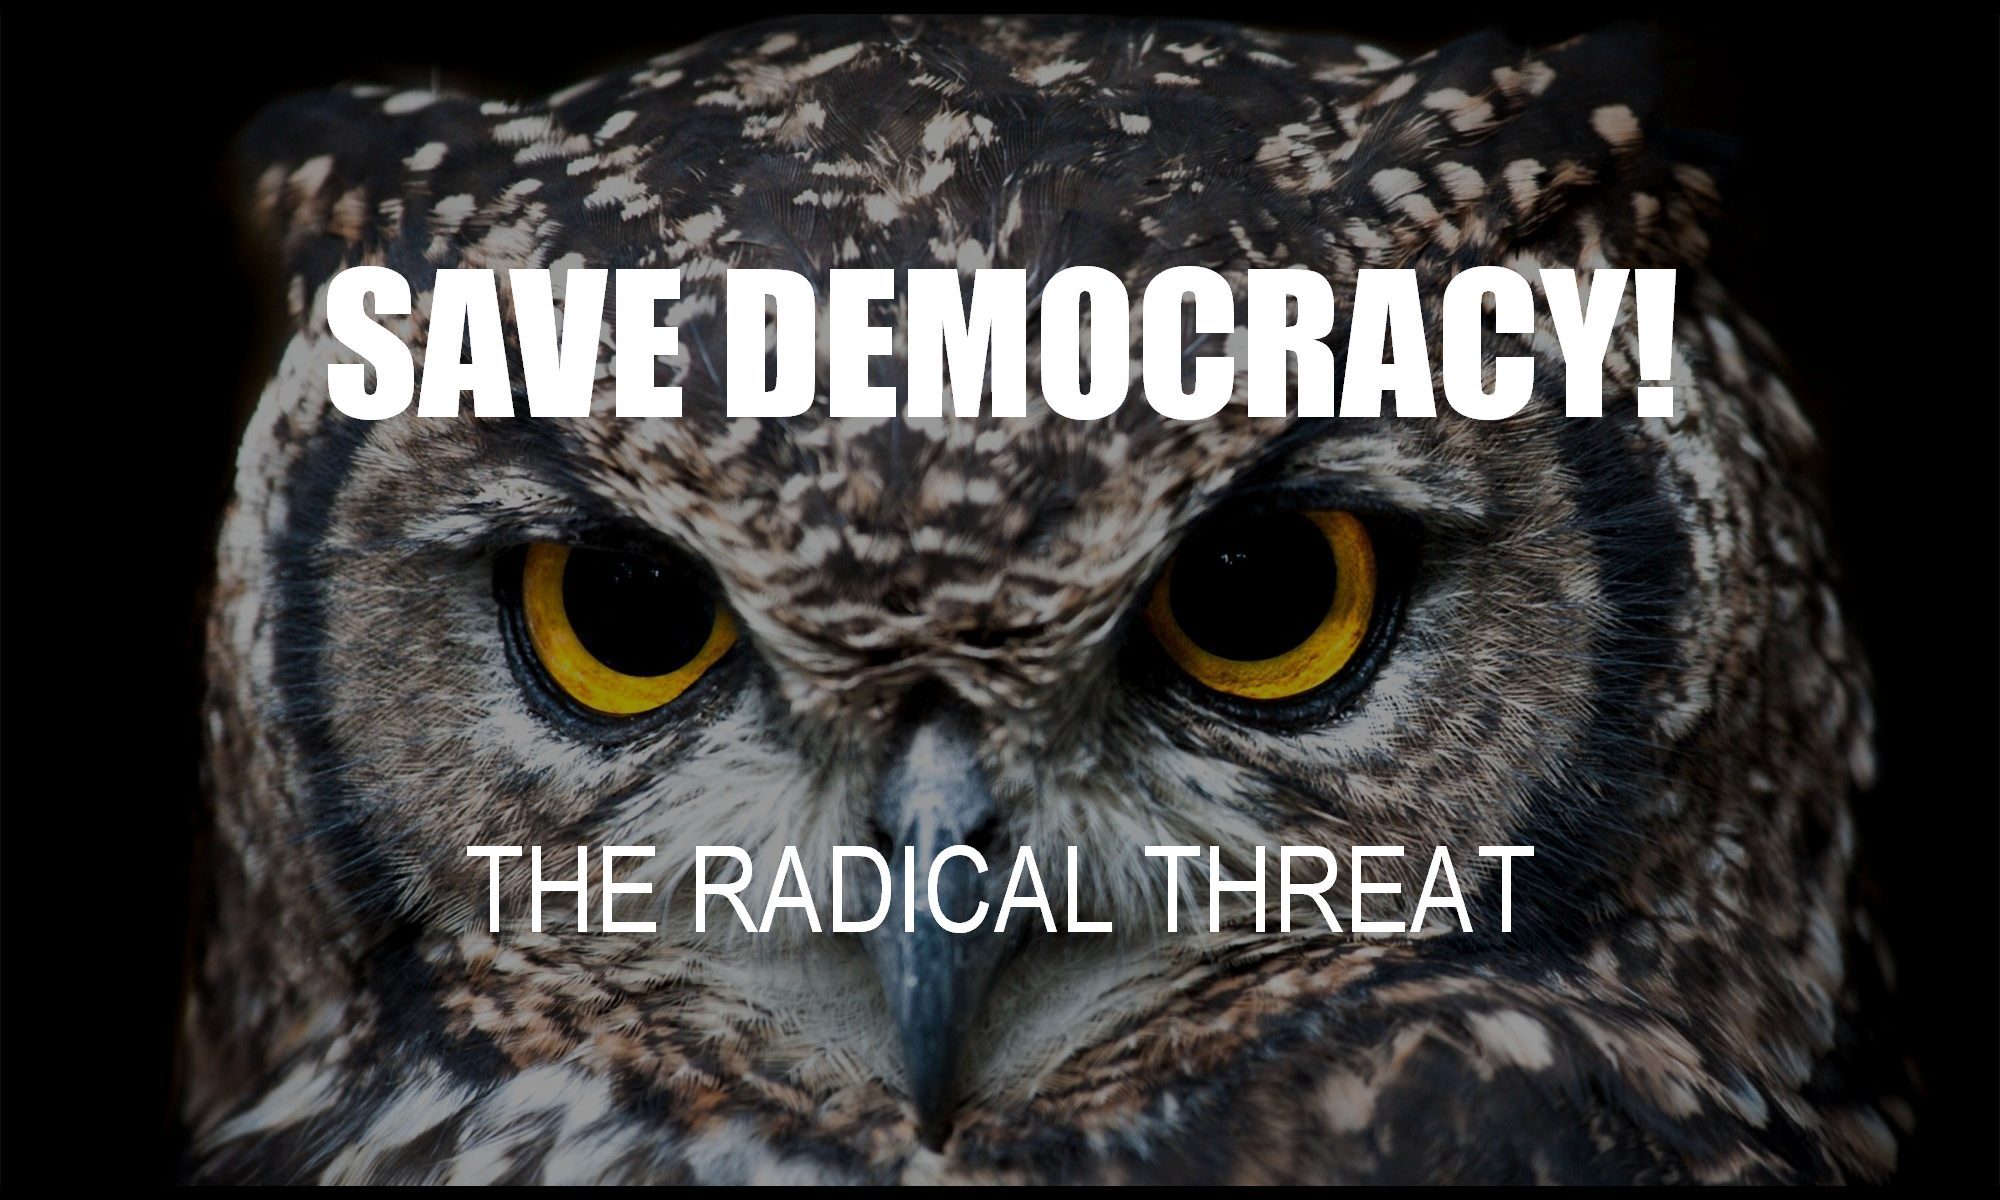 how-do-we-save-american-democracy-our-country-world-from-radicals-trump-threat-violence